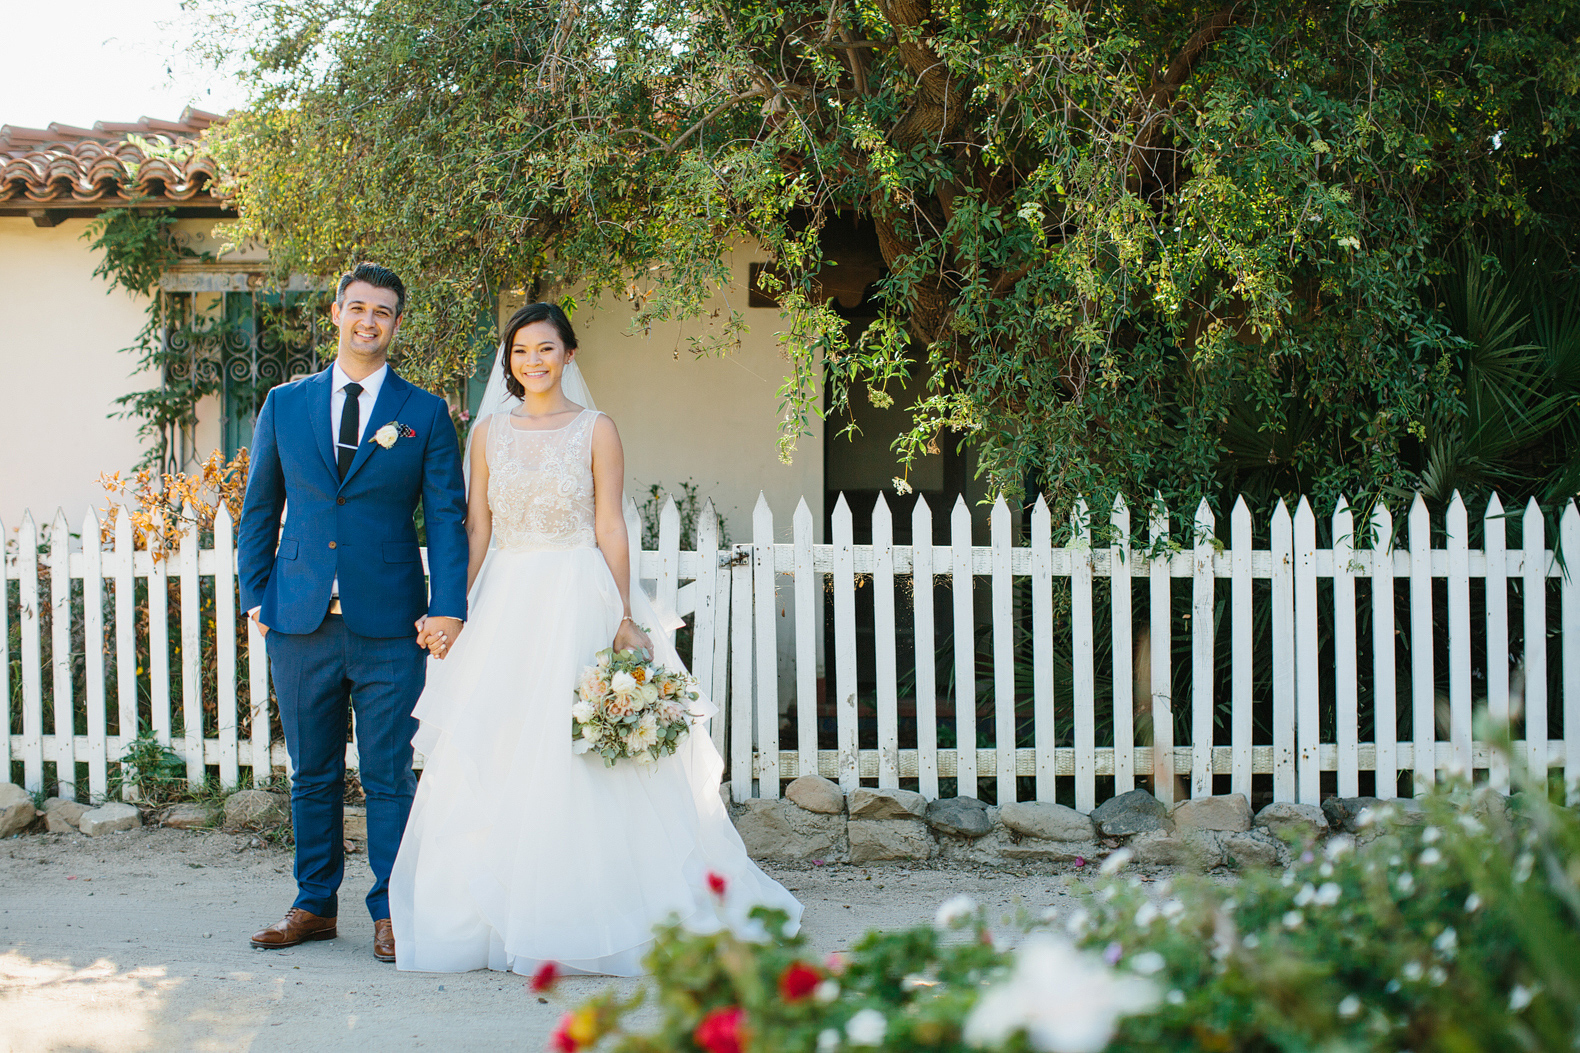 The couple in front of a picket fence. 